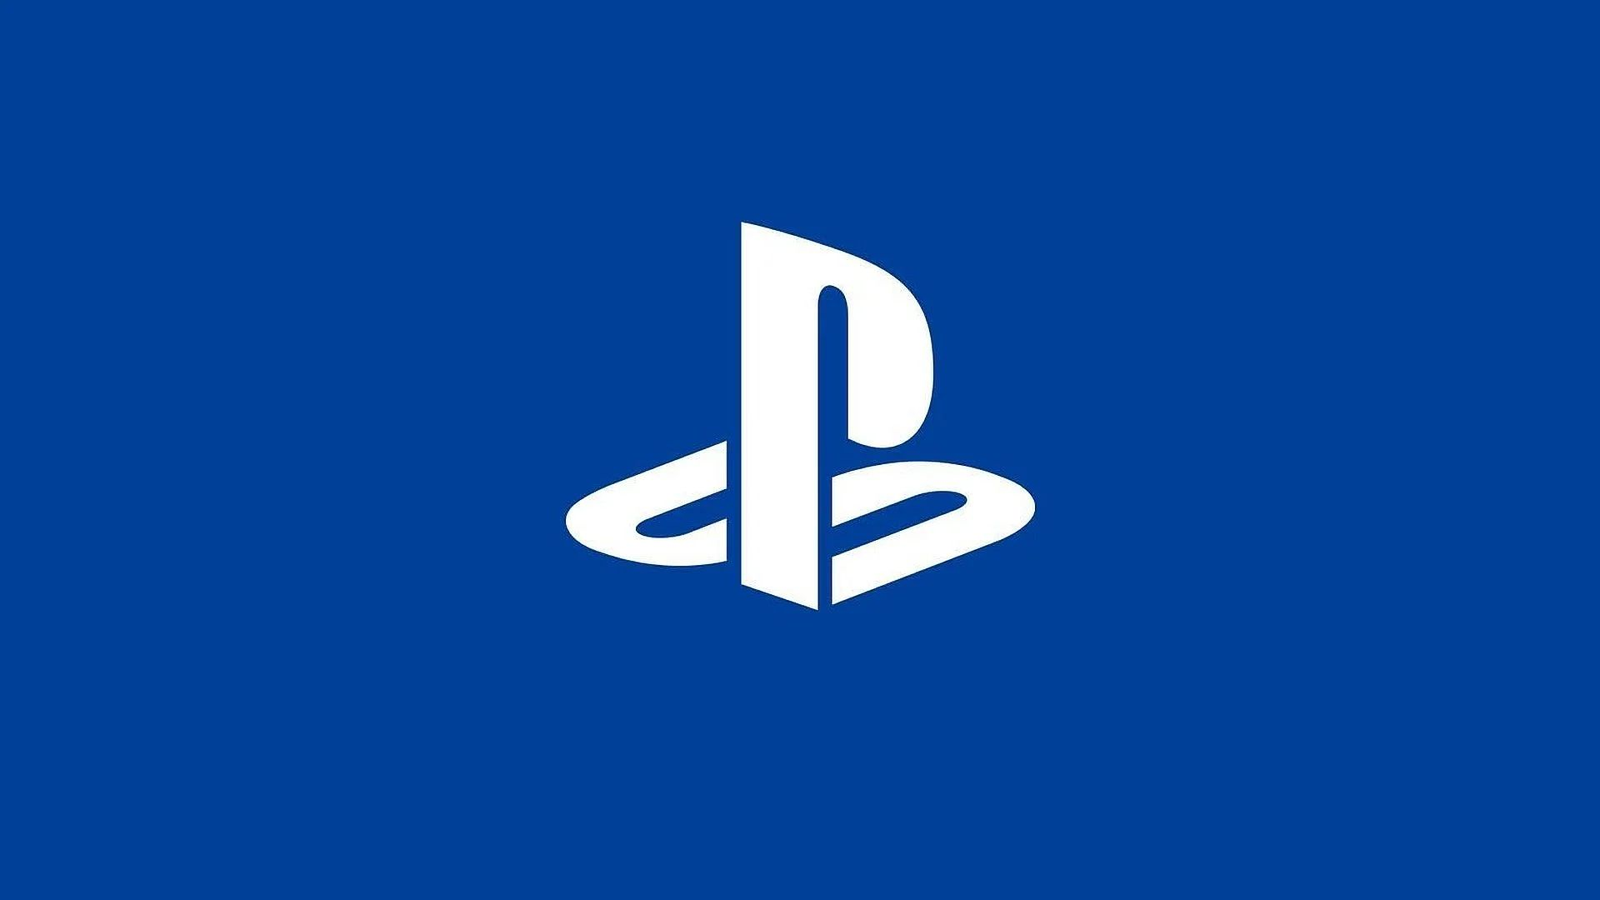 PlayStation Showcase Features Exclusive First Look at Hottest Games of 2021  Showcase